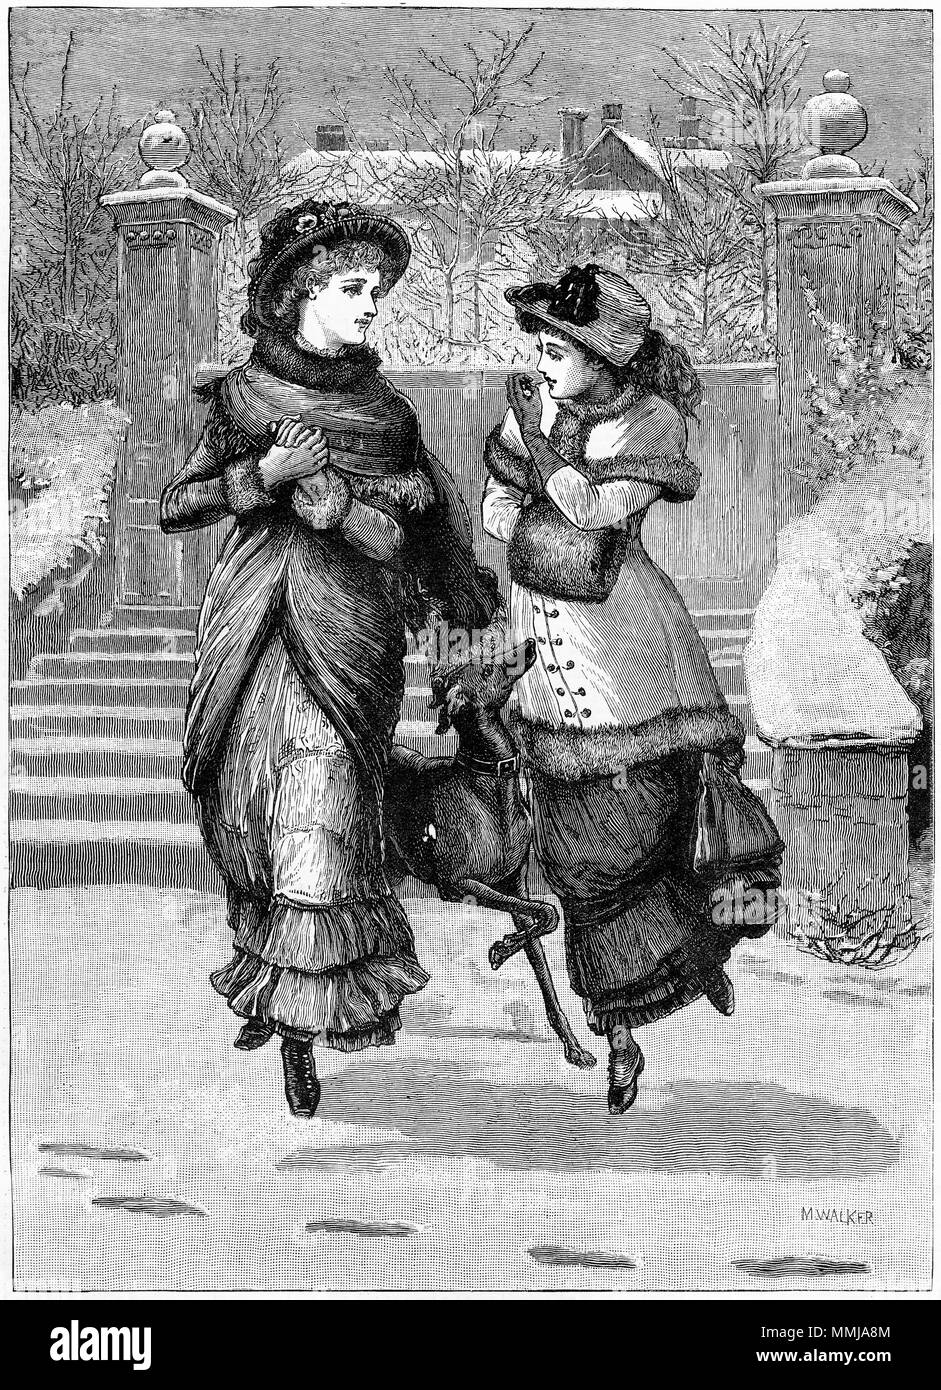 Engraving of two fashionably dressed young women enjoying a winter stroll with a greyhound. From an original engraving in the Girl's Own Paper magazine 1882. Stock Photo